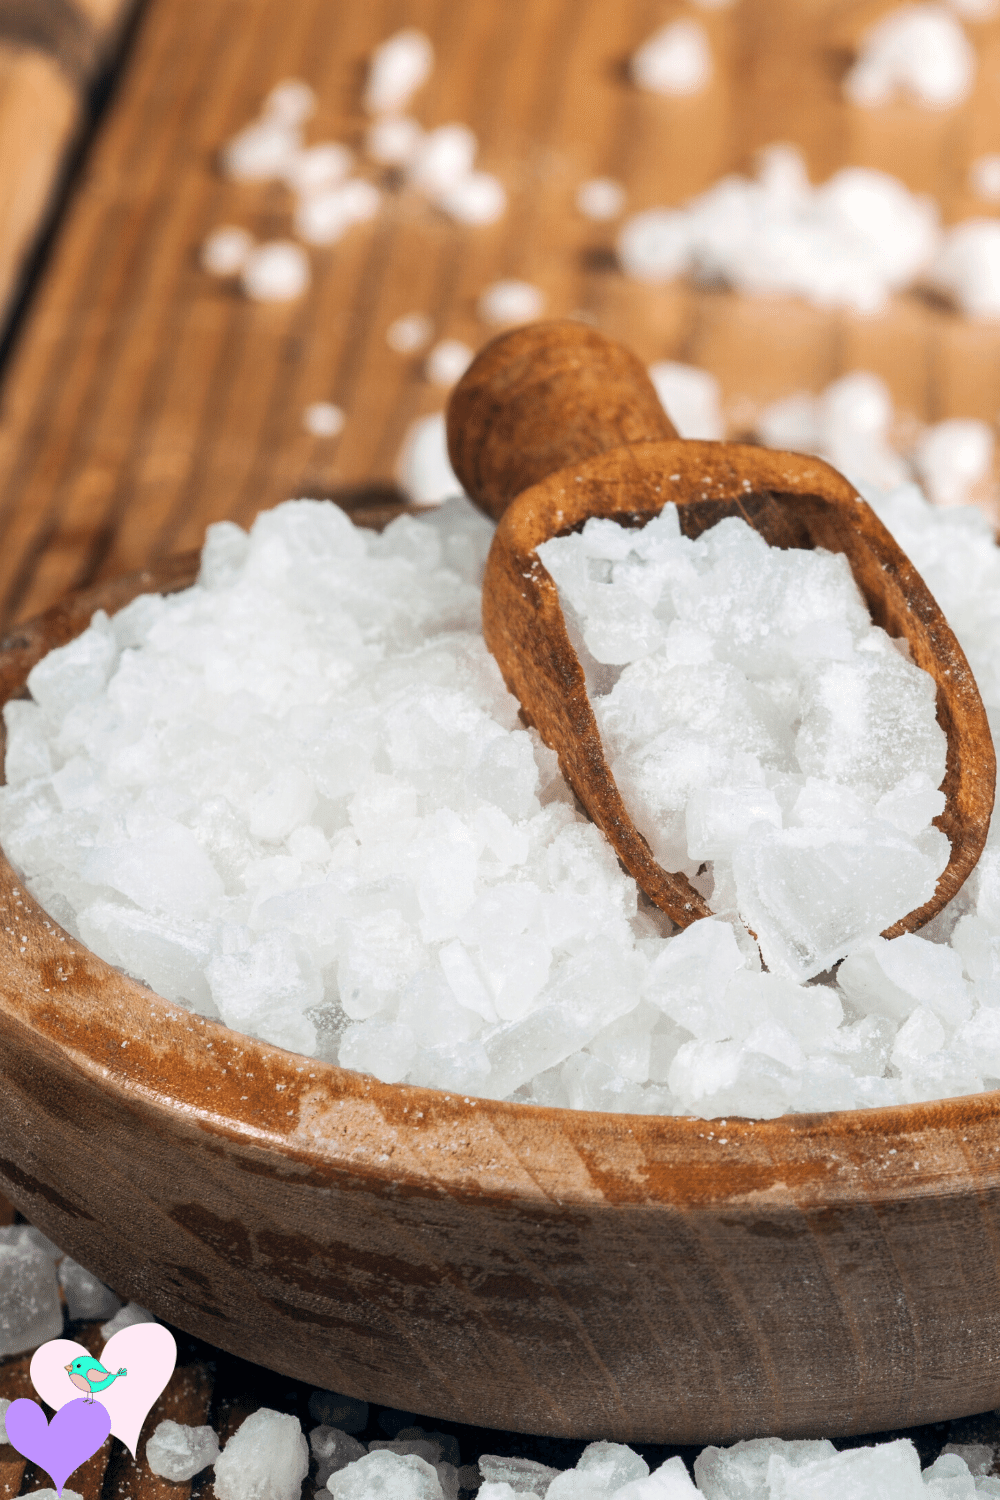 Sea salt is good for cleansing crystals